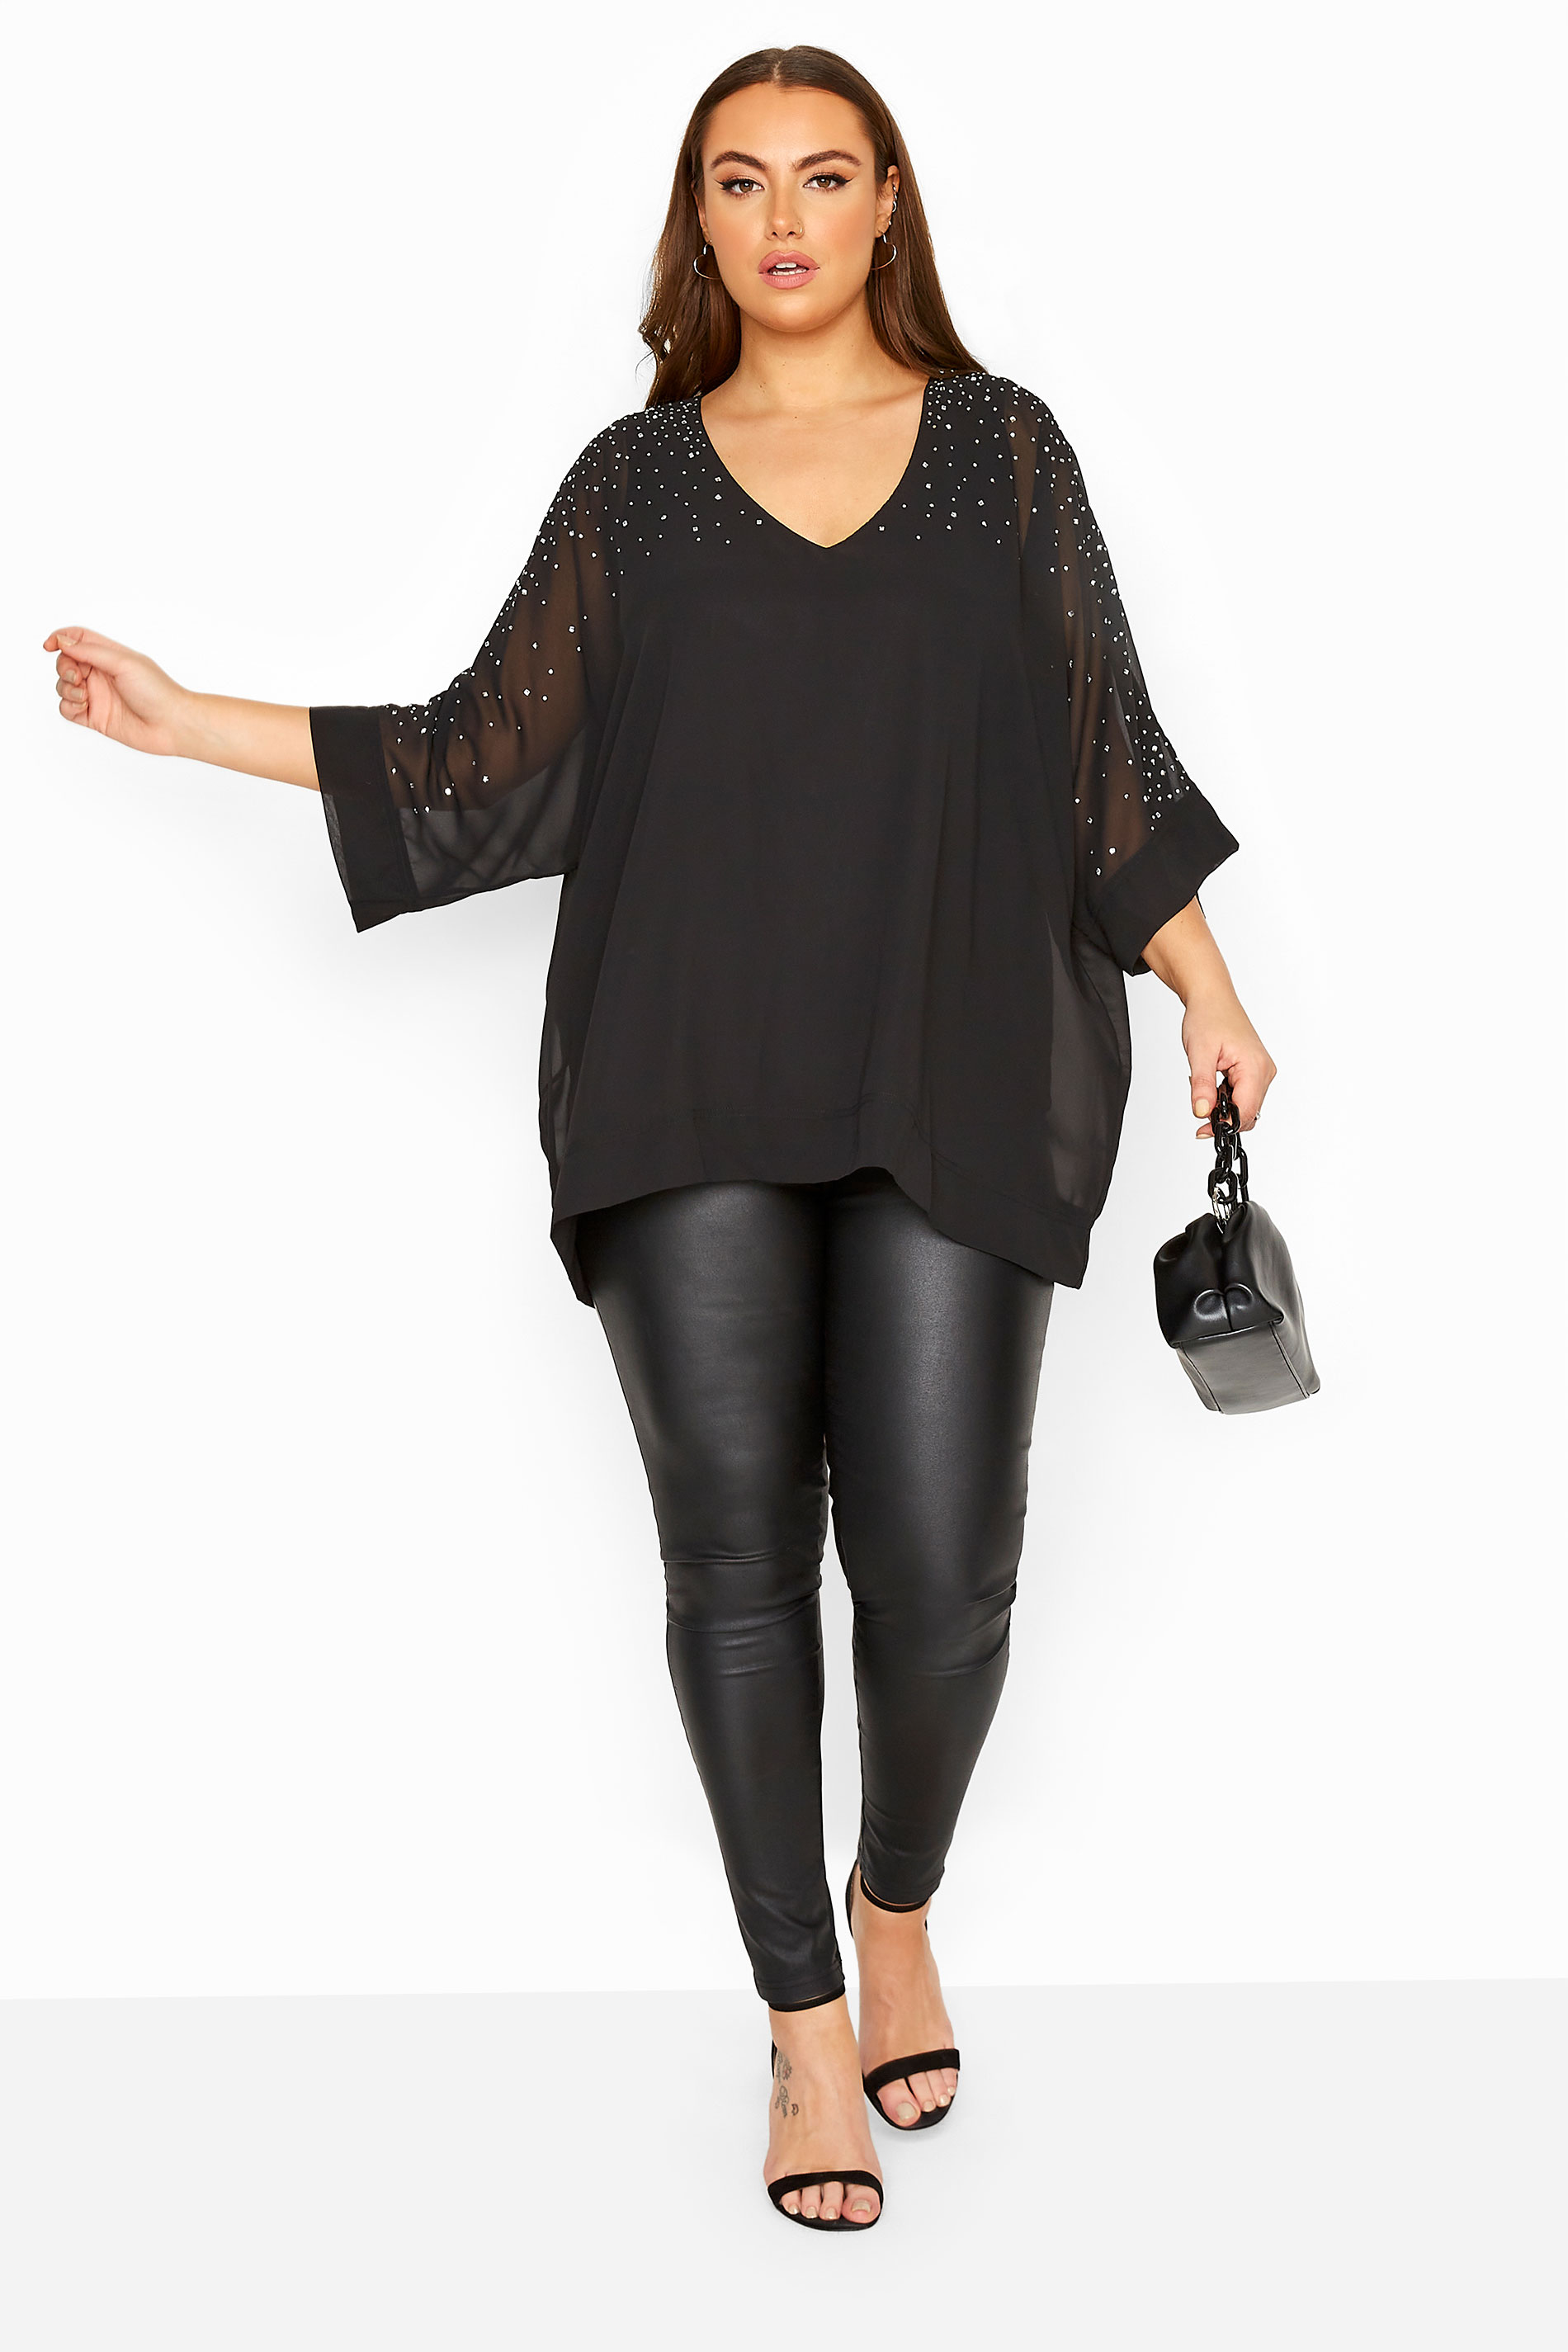 YOURS LONDON Black Diamante Chiffon Cape Top | Yours Clothing